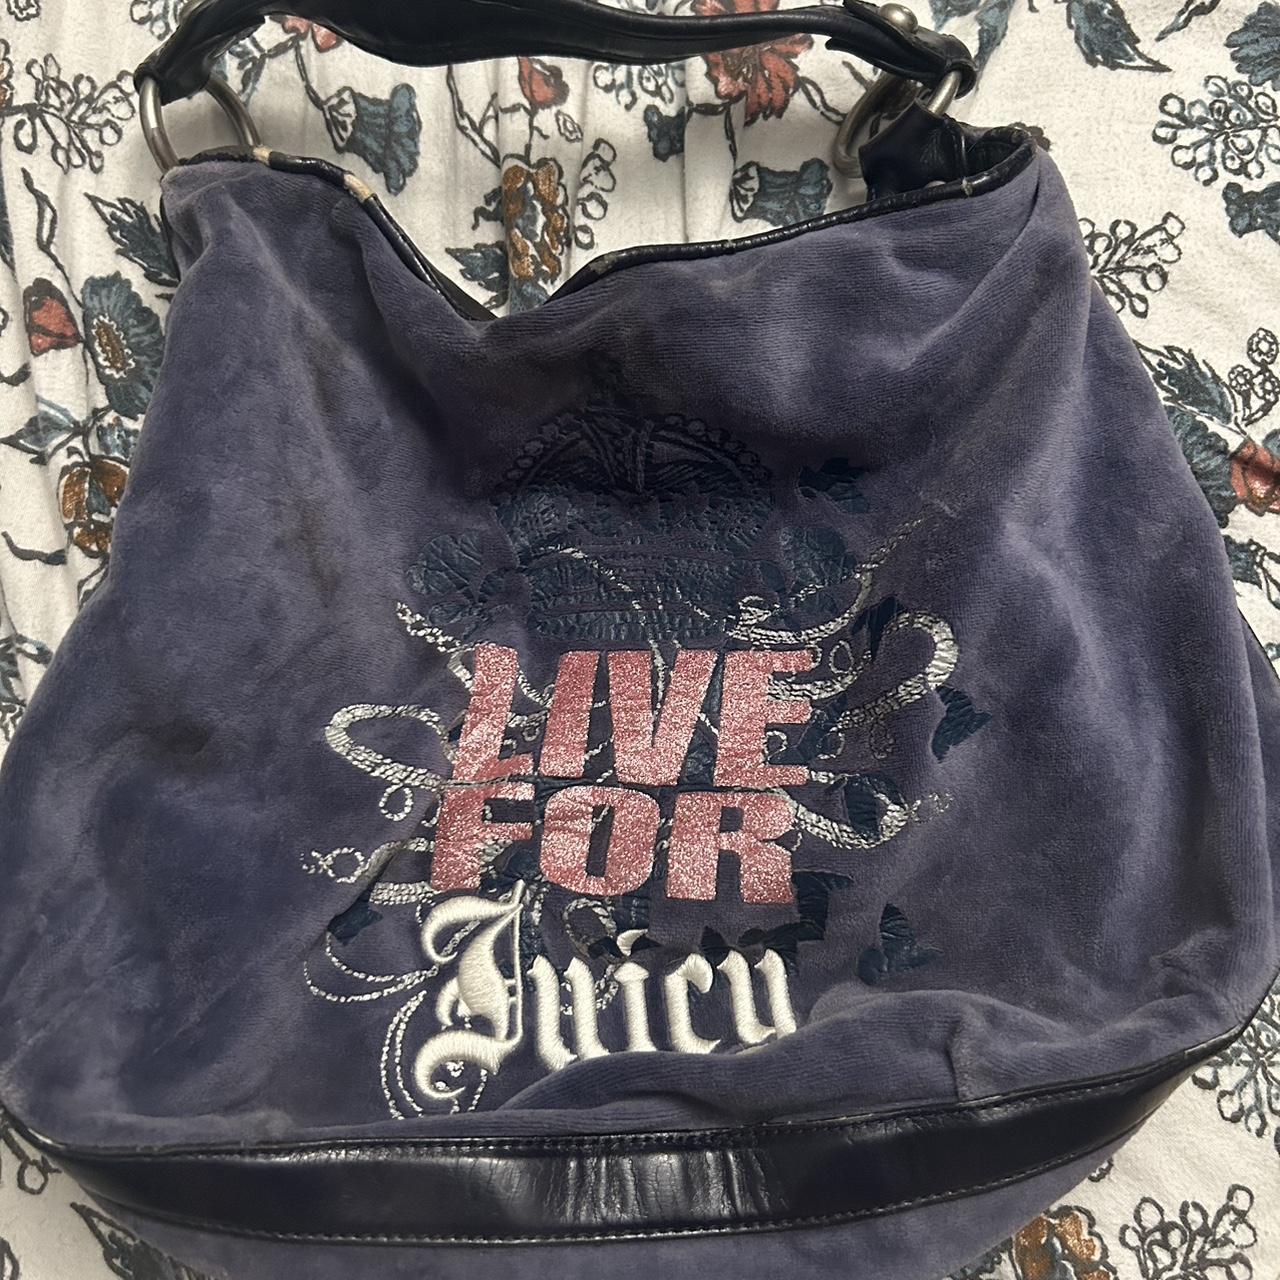 purple juicy couture bags finds｜TikTok Search